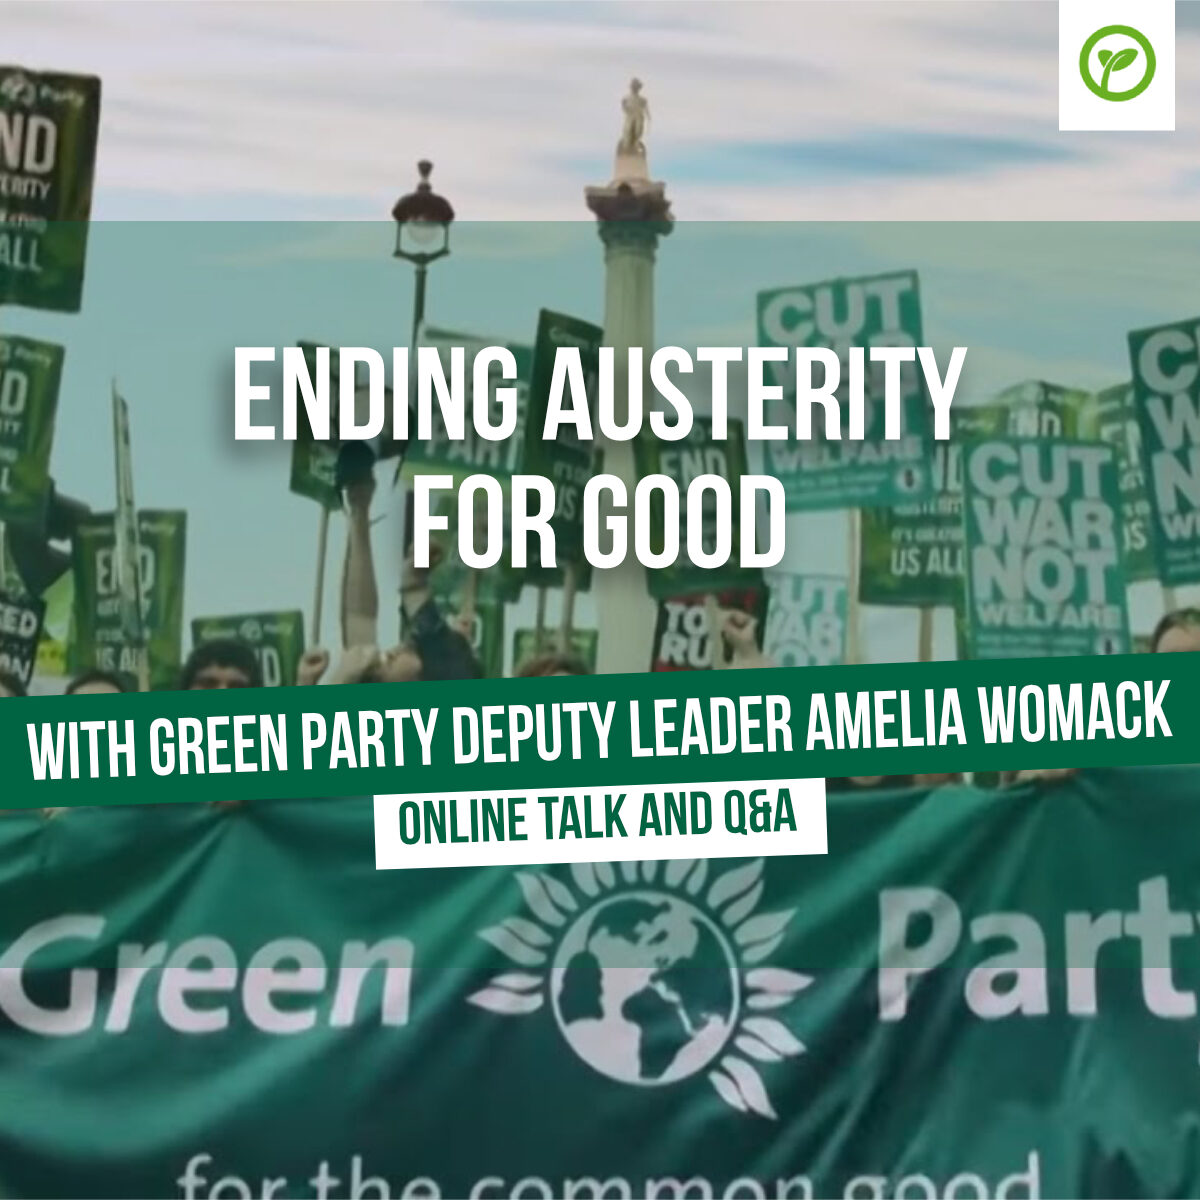 Ending Austerity for Good with Green Party deputy leader Amelia Womack. Online talk and Q&A.